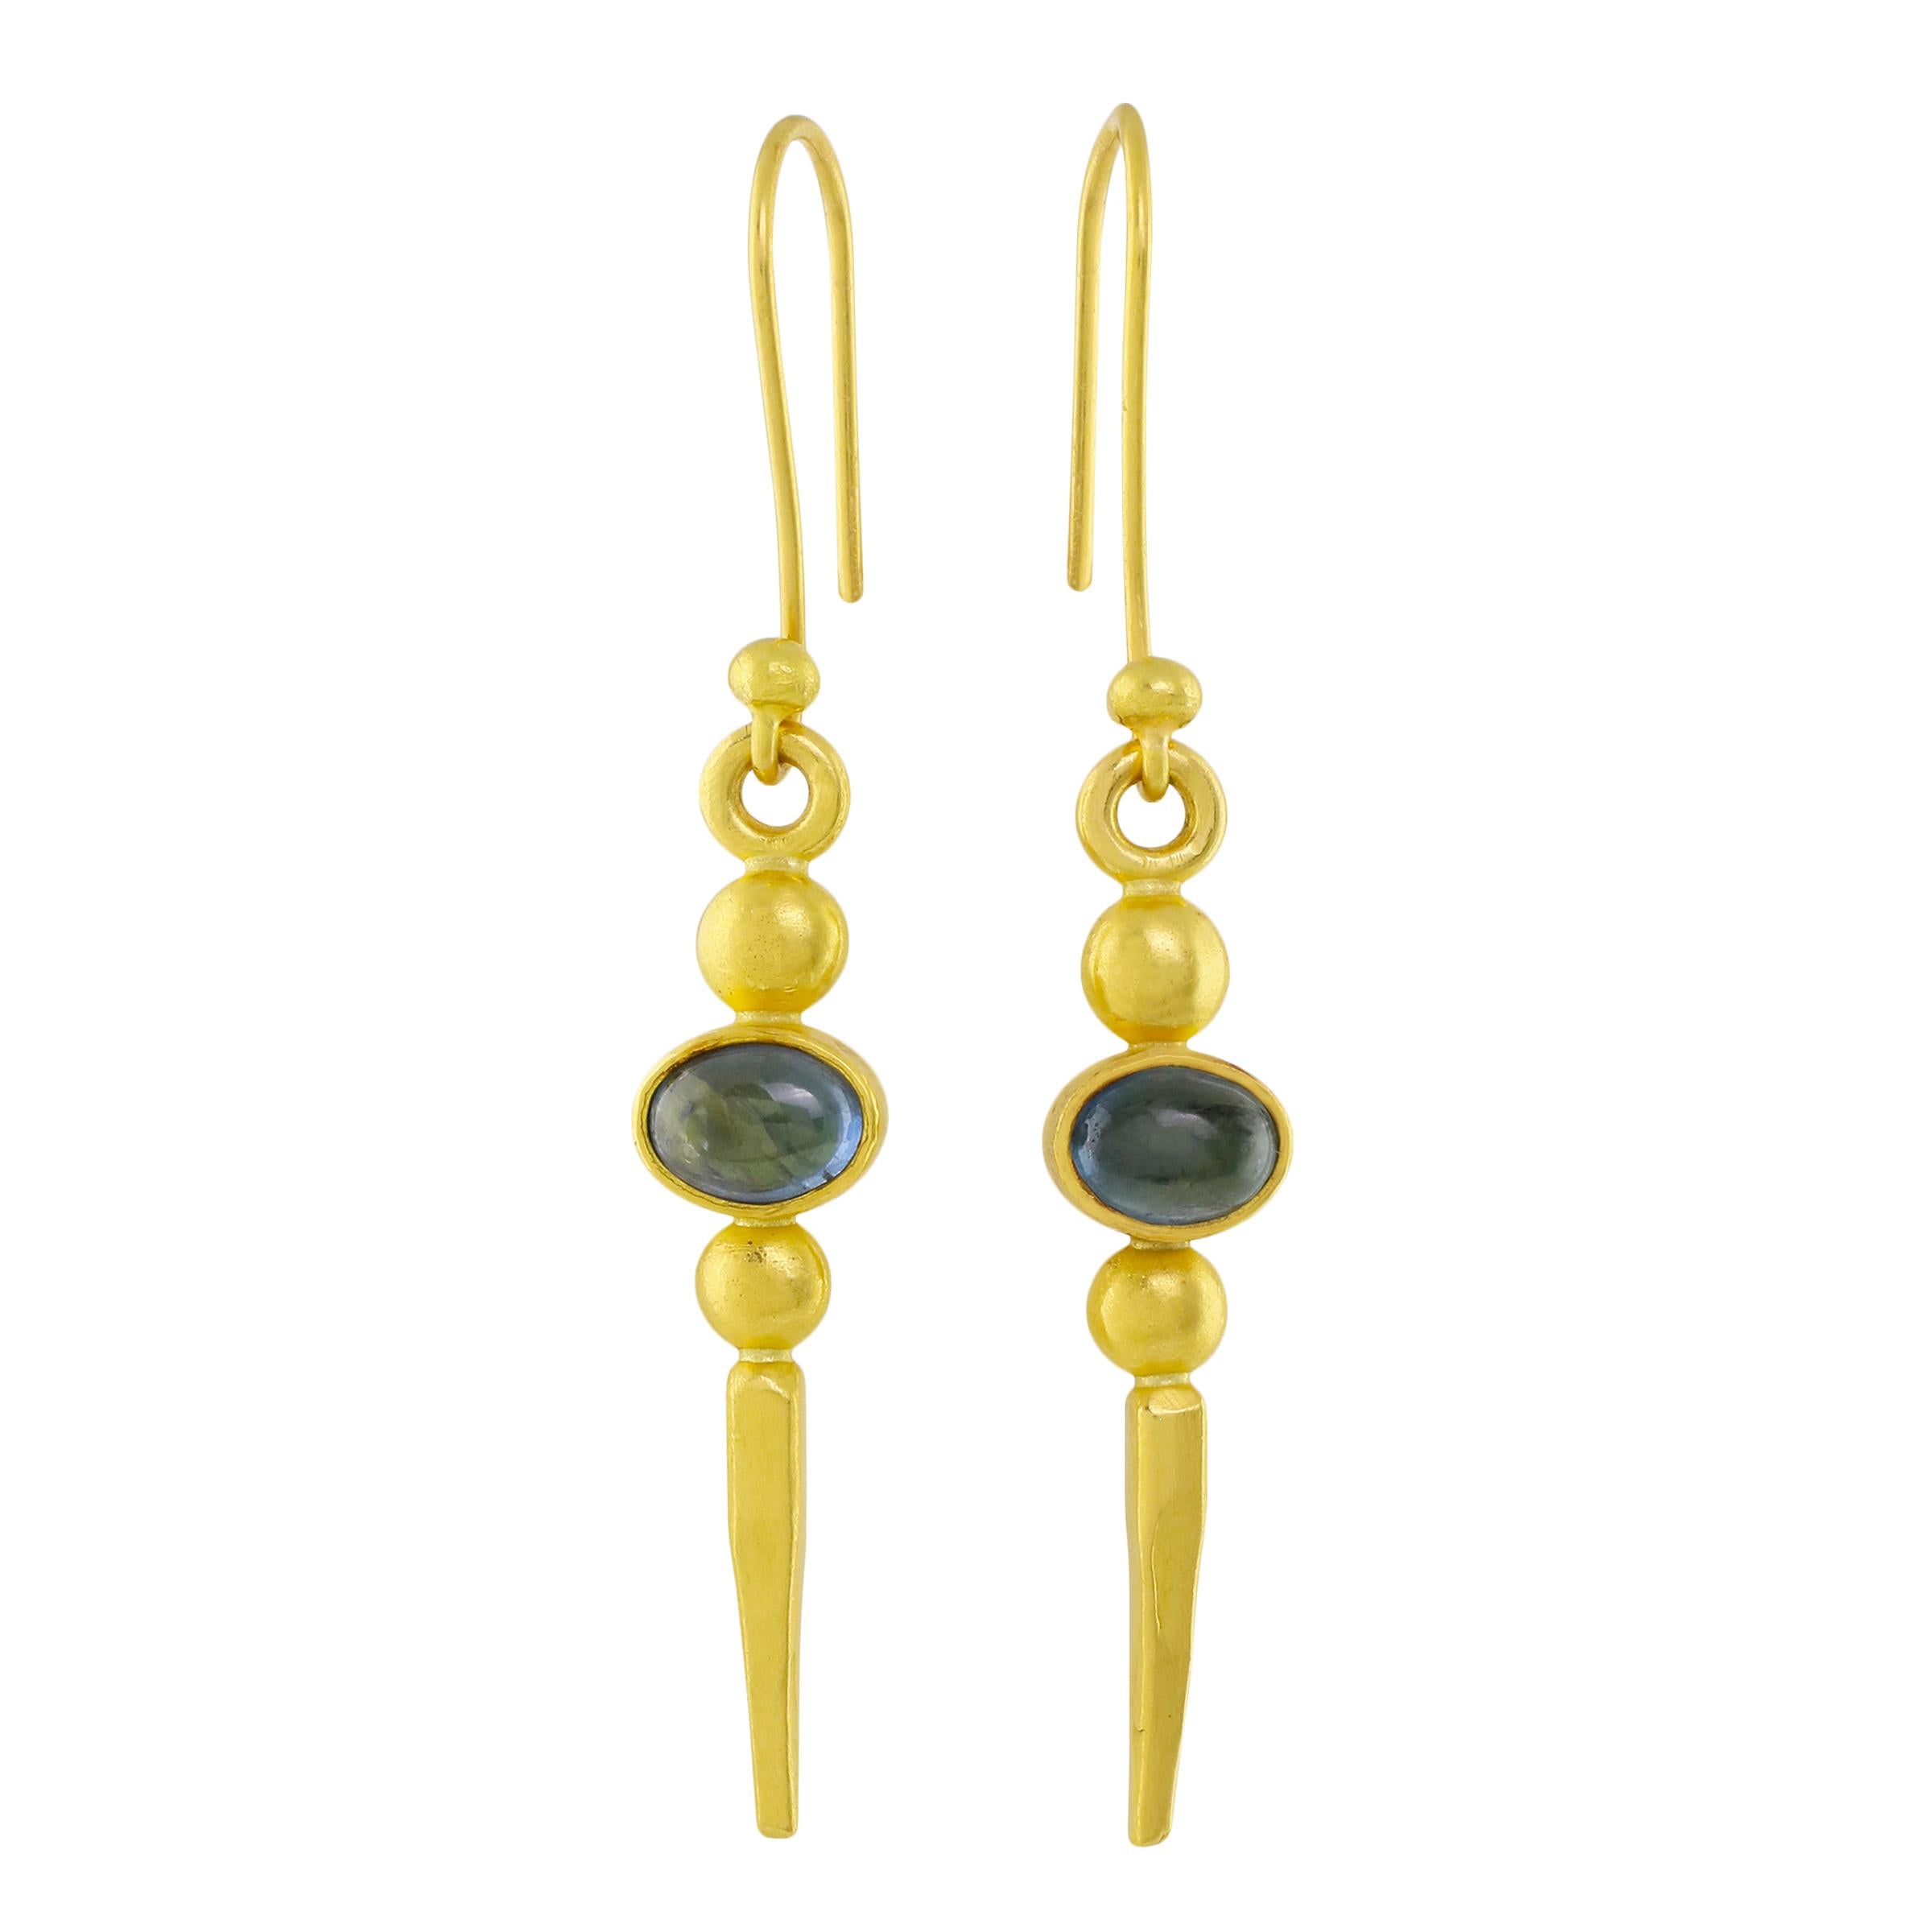 PHILIPPE SPENCER - 2.85 Ct. Total Fancy-Color Cabochon Sapphire Statement Earrings. Each Sapphire is set in Pure 22K Gold with Solid 20K Gold Connection Links & Features. 

An authentically Hand-Forged & Unique One-Of-A-Kind pair of Heirloom-Worthy